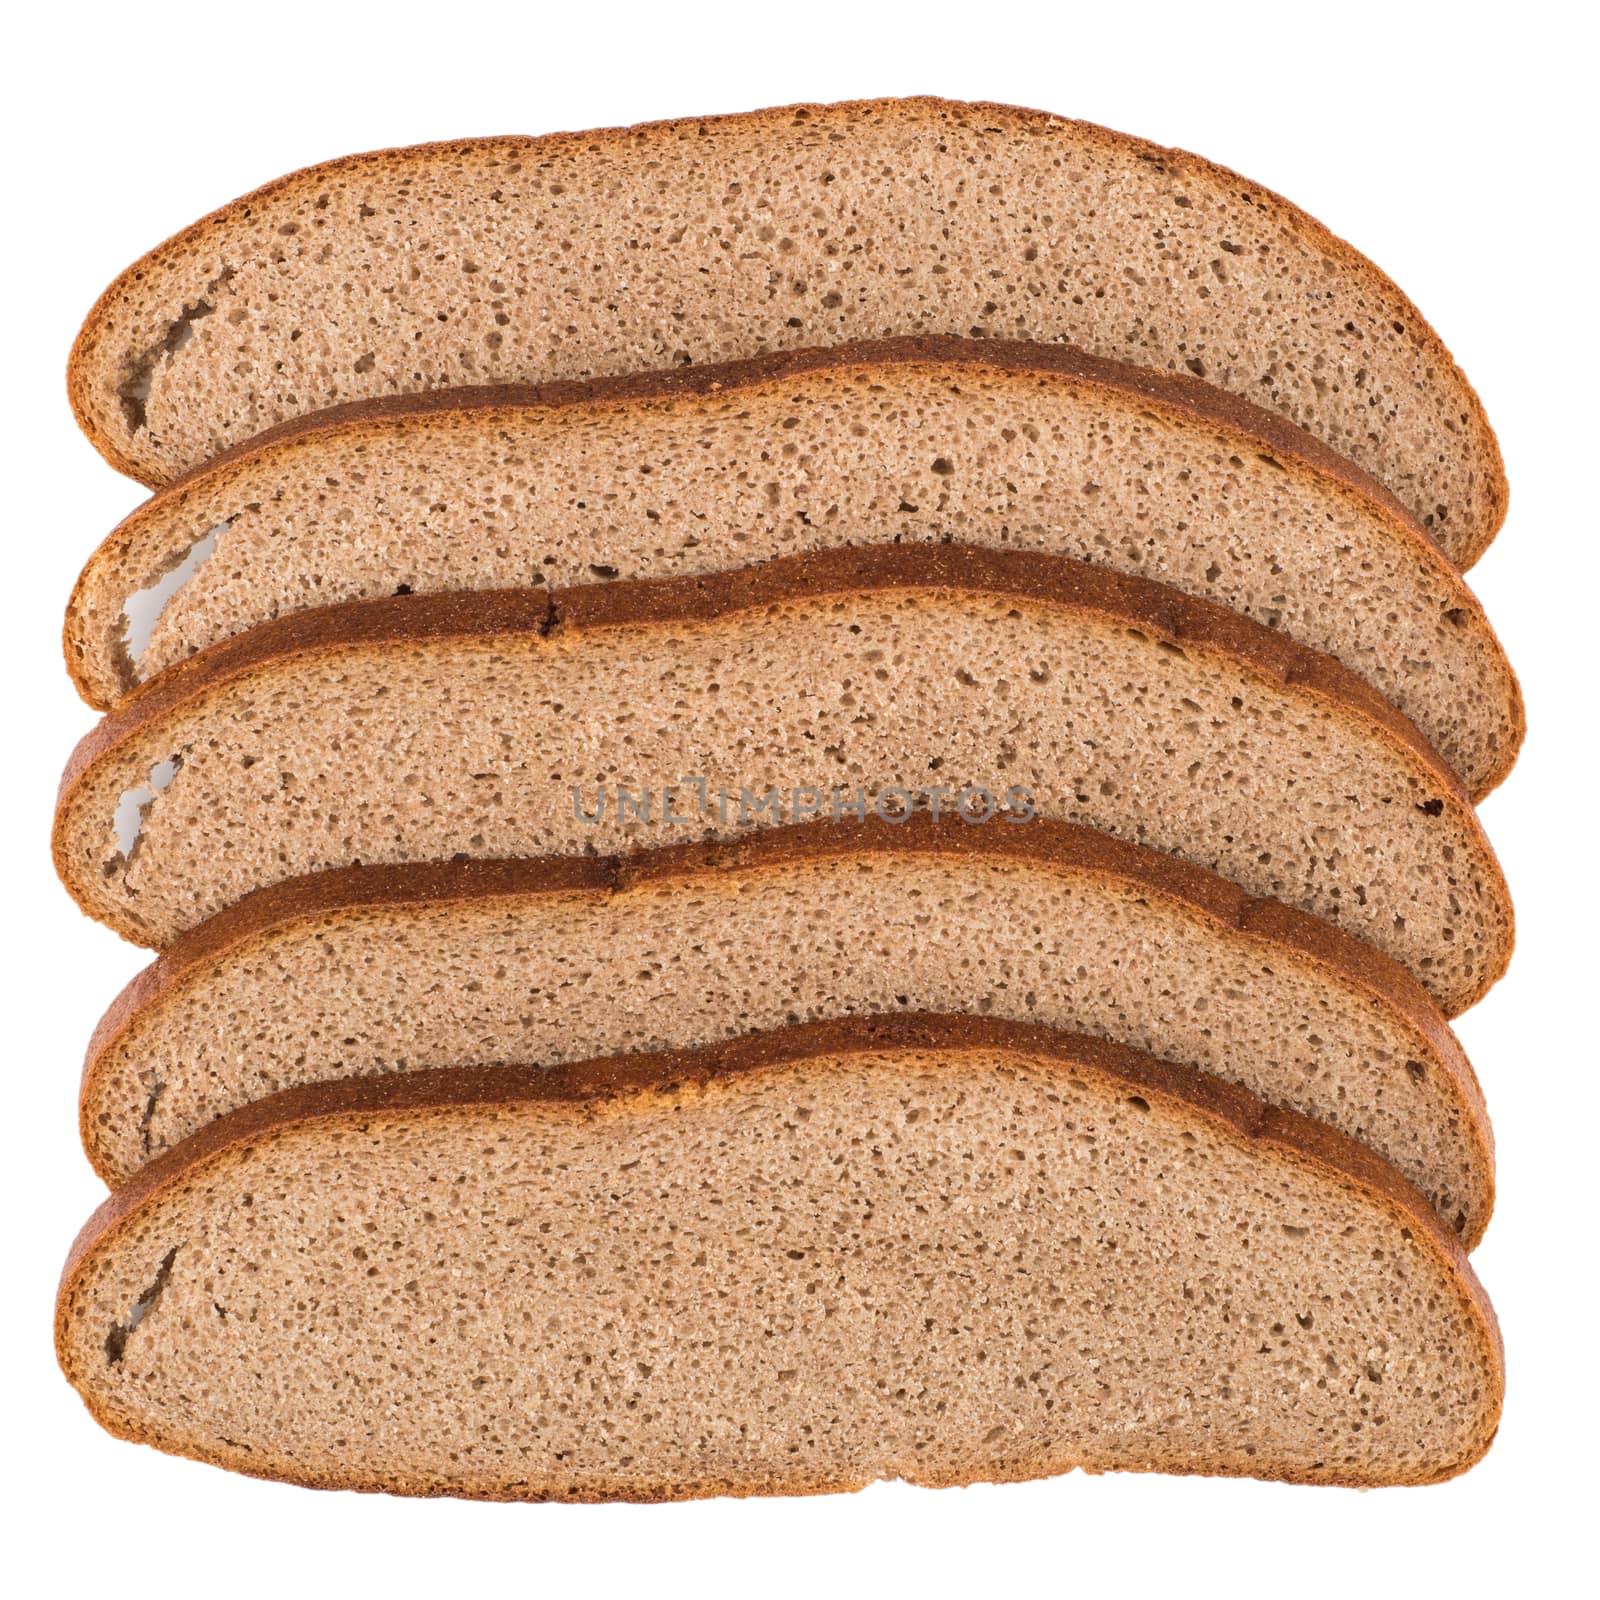 Fresh sliced rye bread isolated on white background cutout. Top view.